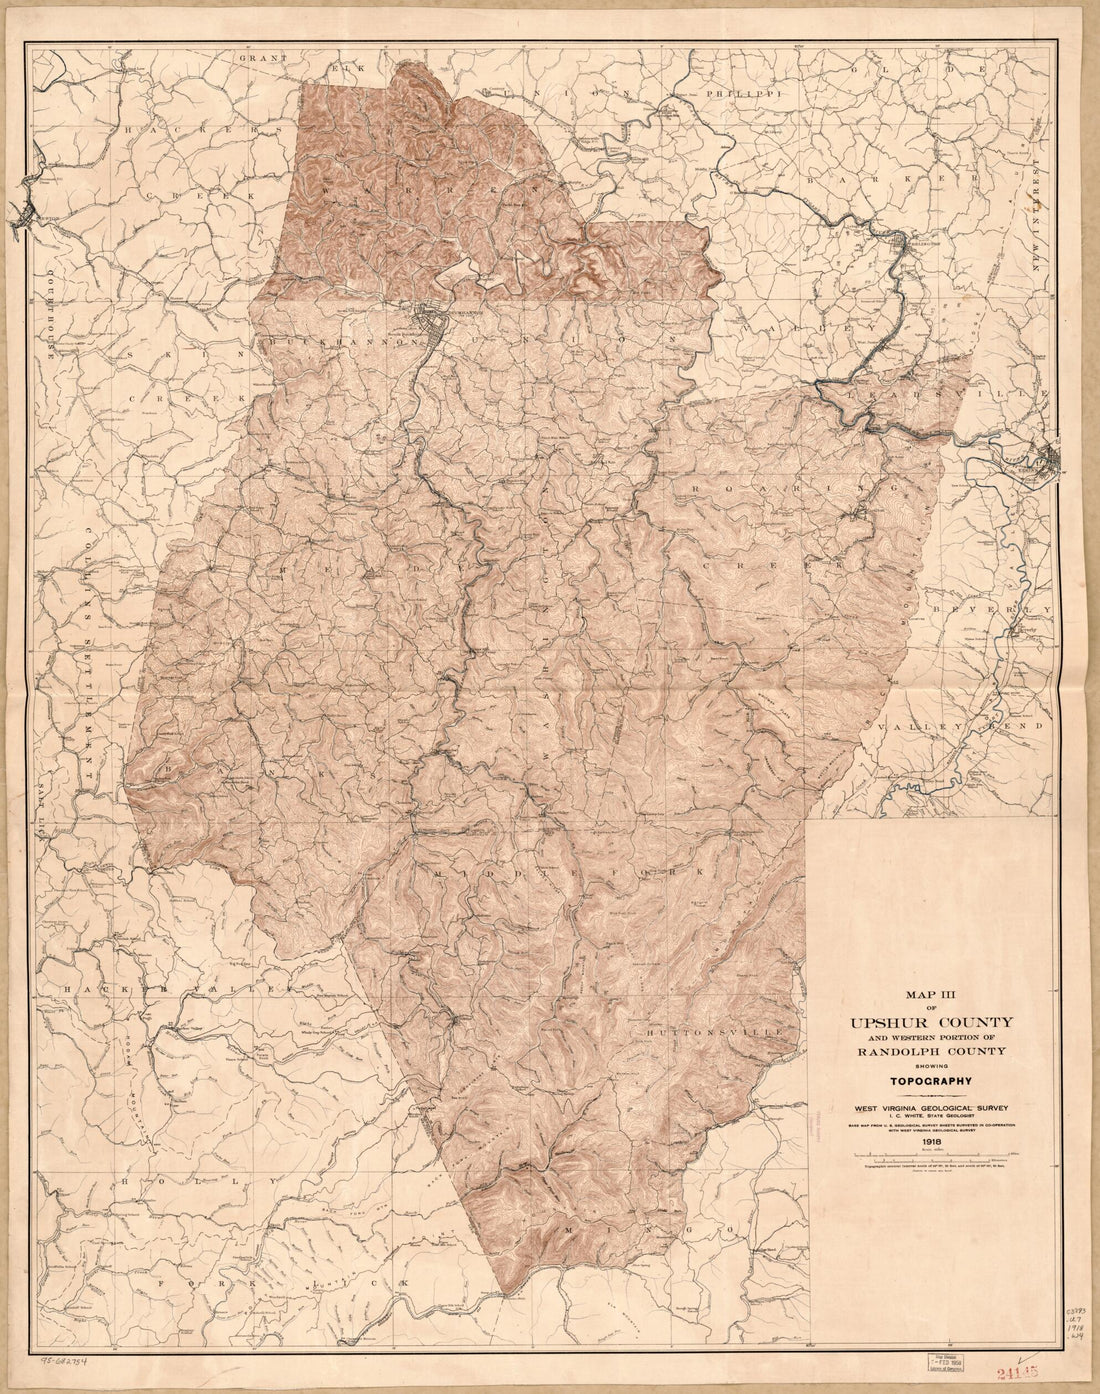 This old map of Map III of Upshur County and Western Portion of Randolph County Showing Topography from 1918 was created by  West Virginia Geological and Economic Survey, I. C. (Israel Charles) White in 1918